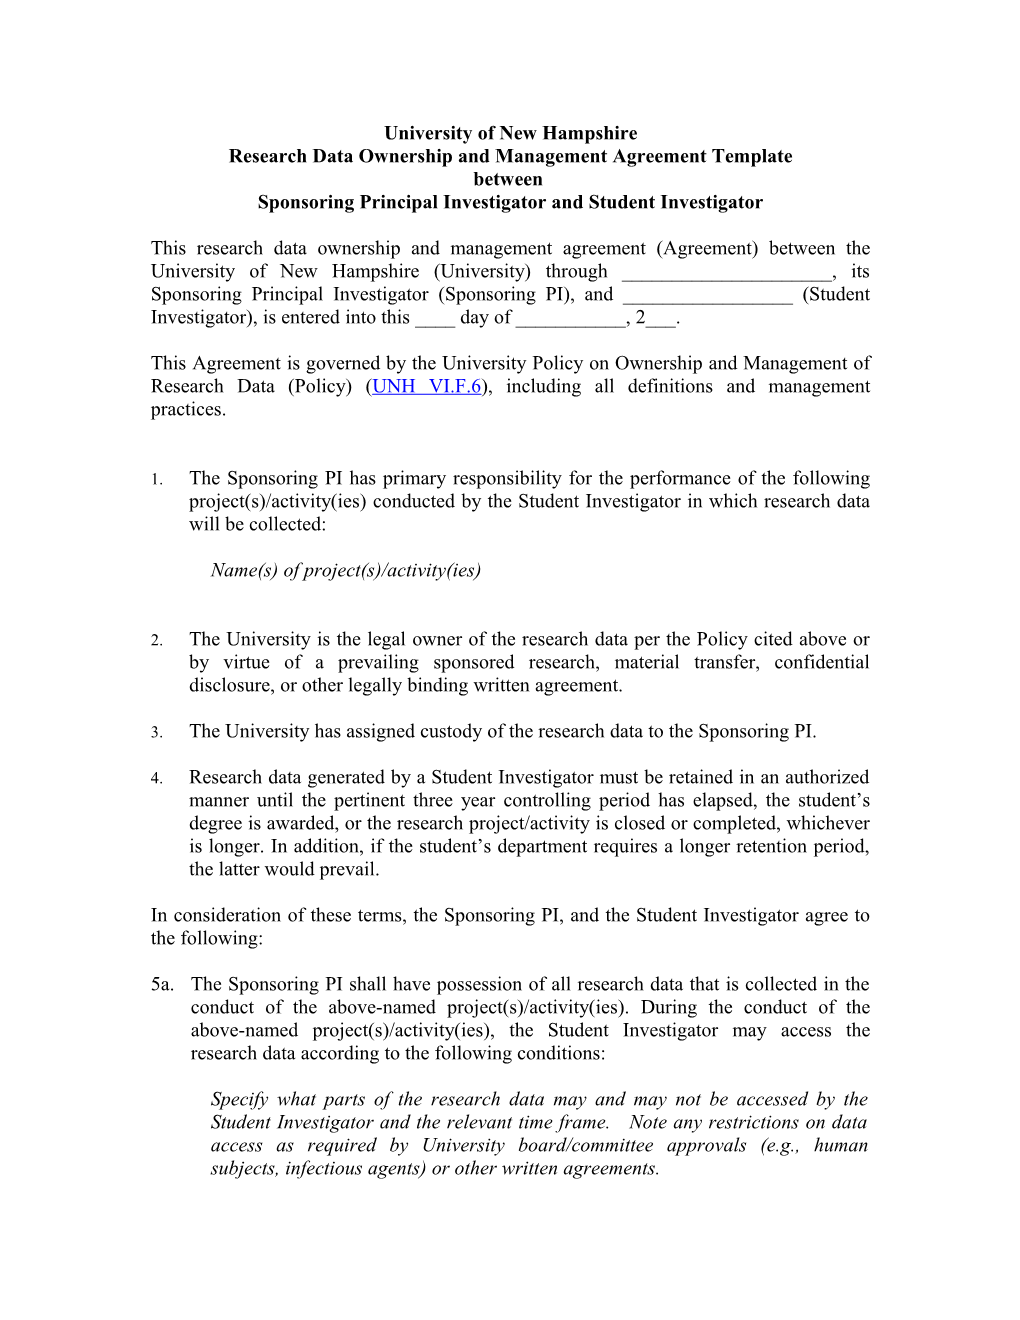 Research Data Ownership and Management Agreement Template